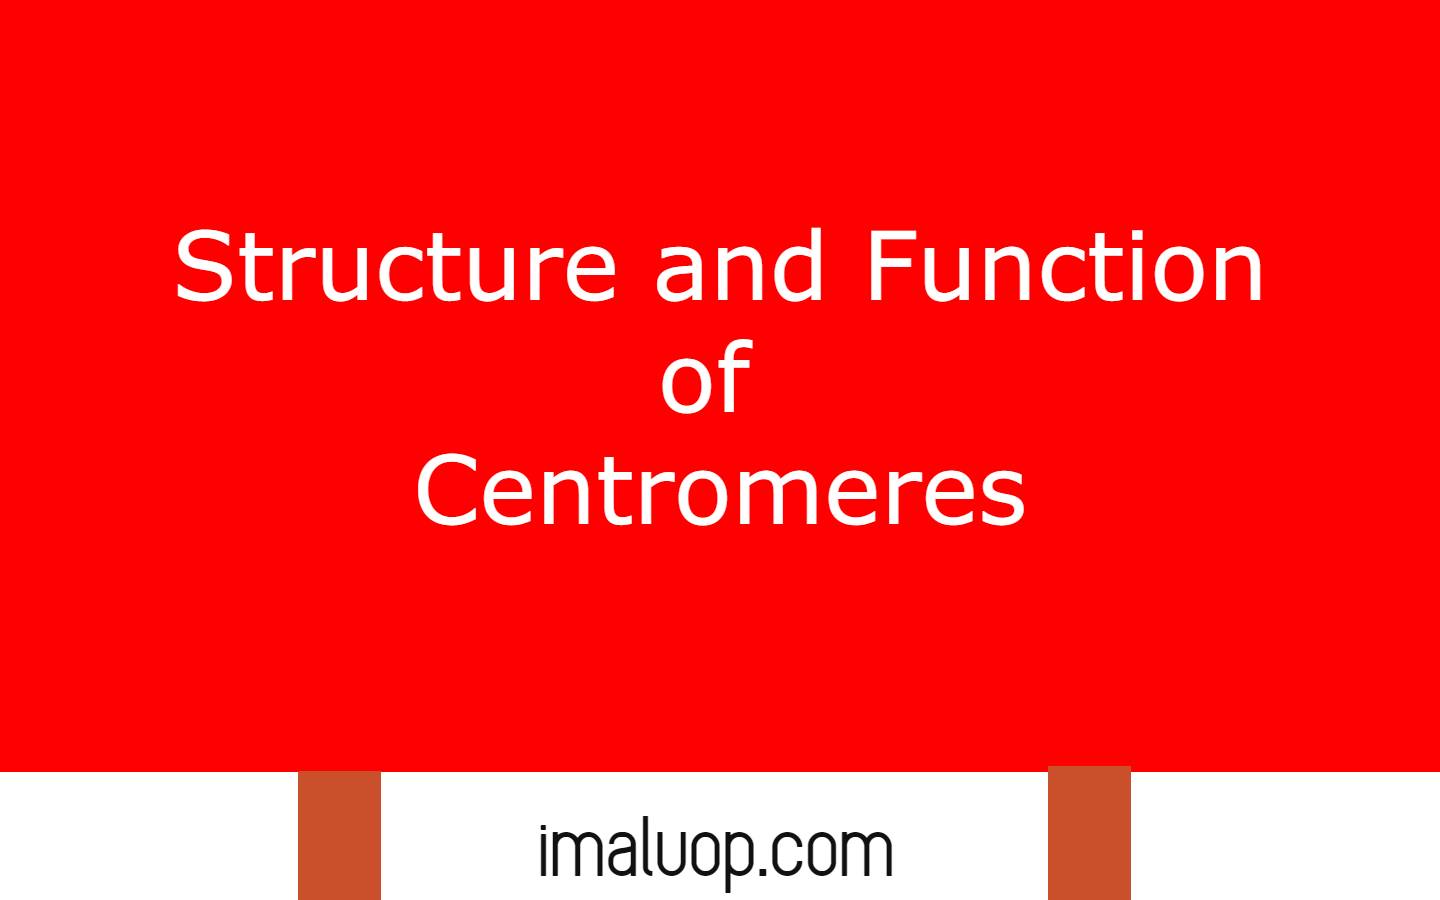 Structure and Function of Centromeres